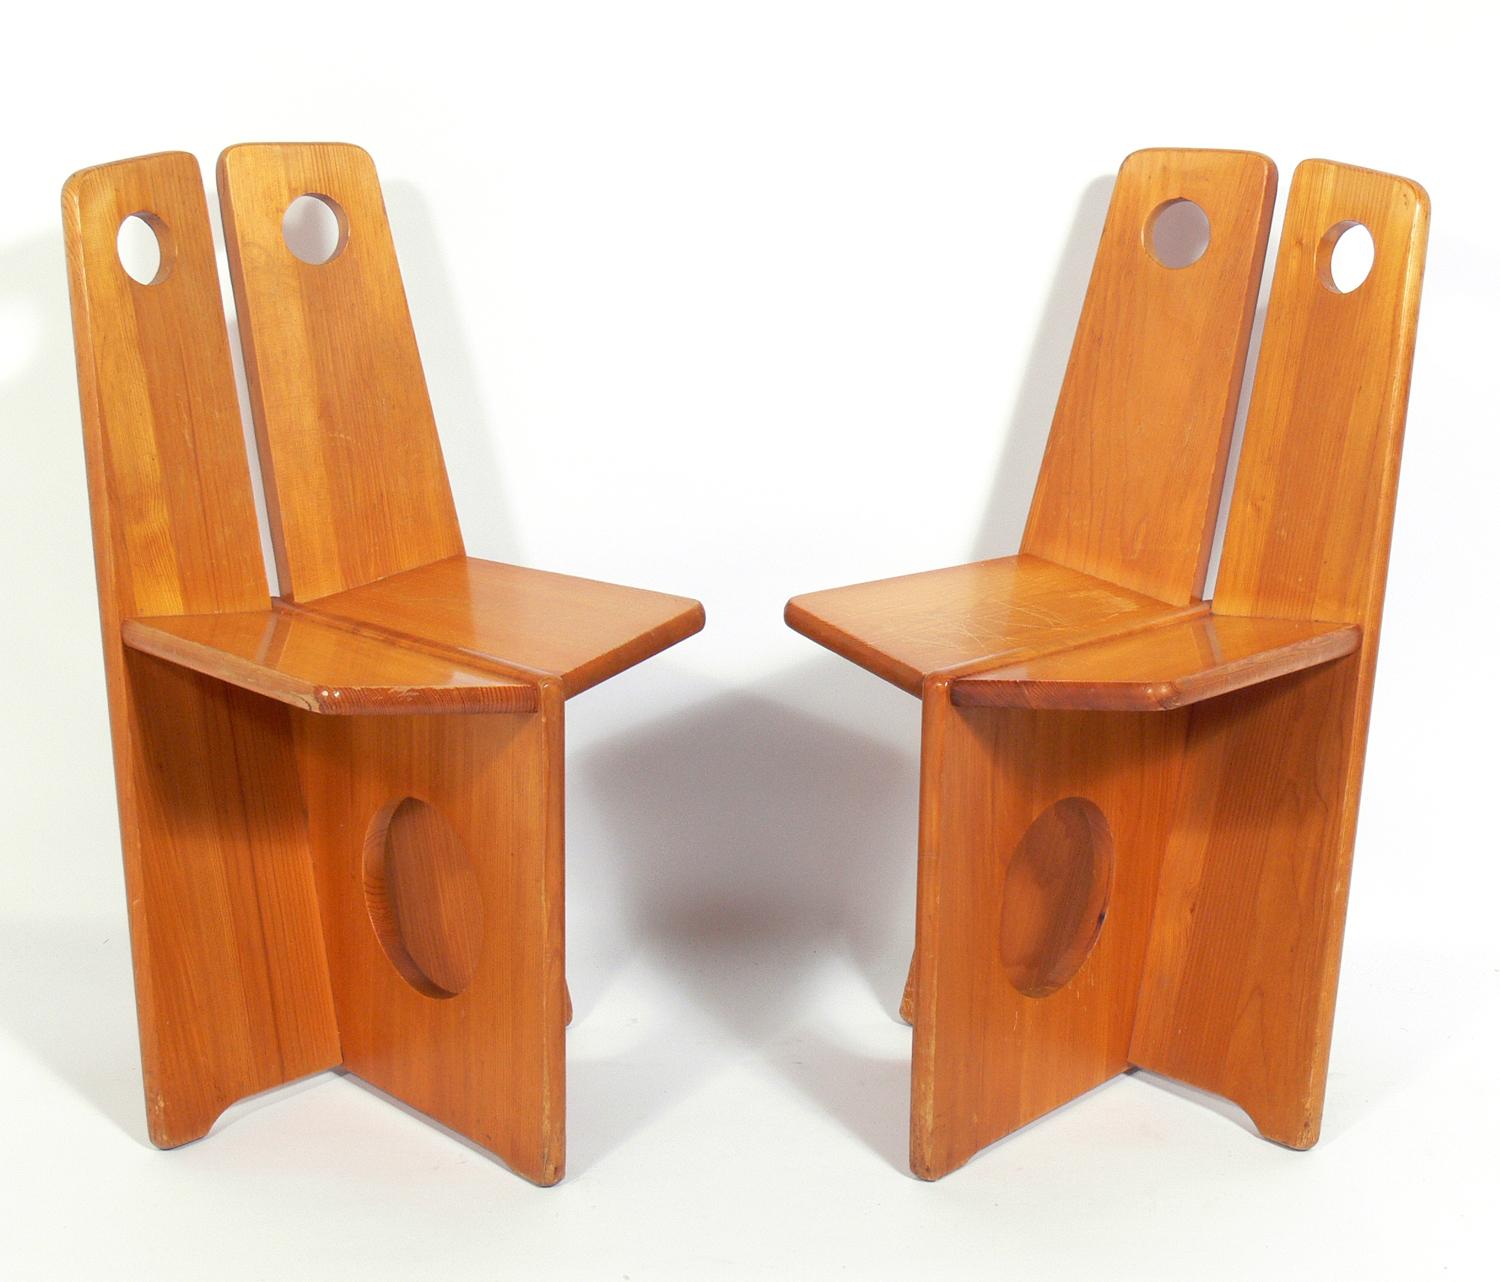 Pair of low slung constructivist chairs, German, circa 1950s. Design clearly influenced by Russian constructivism. Well worn, Industrial vibe with warm original patina. They are a low slung lounge size, and appear to be kid sized, but are actually